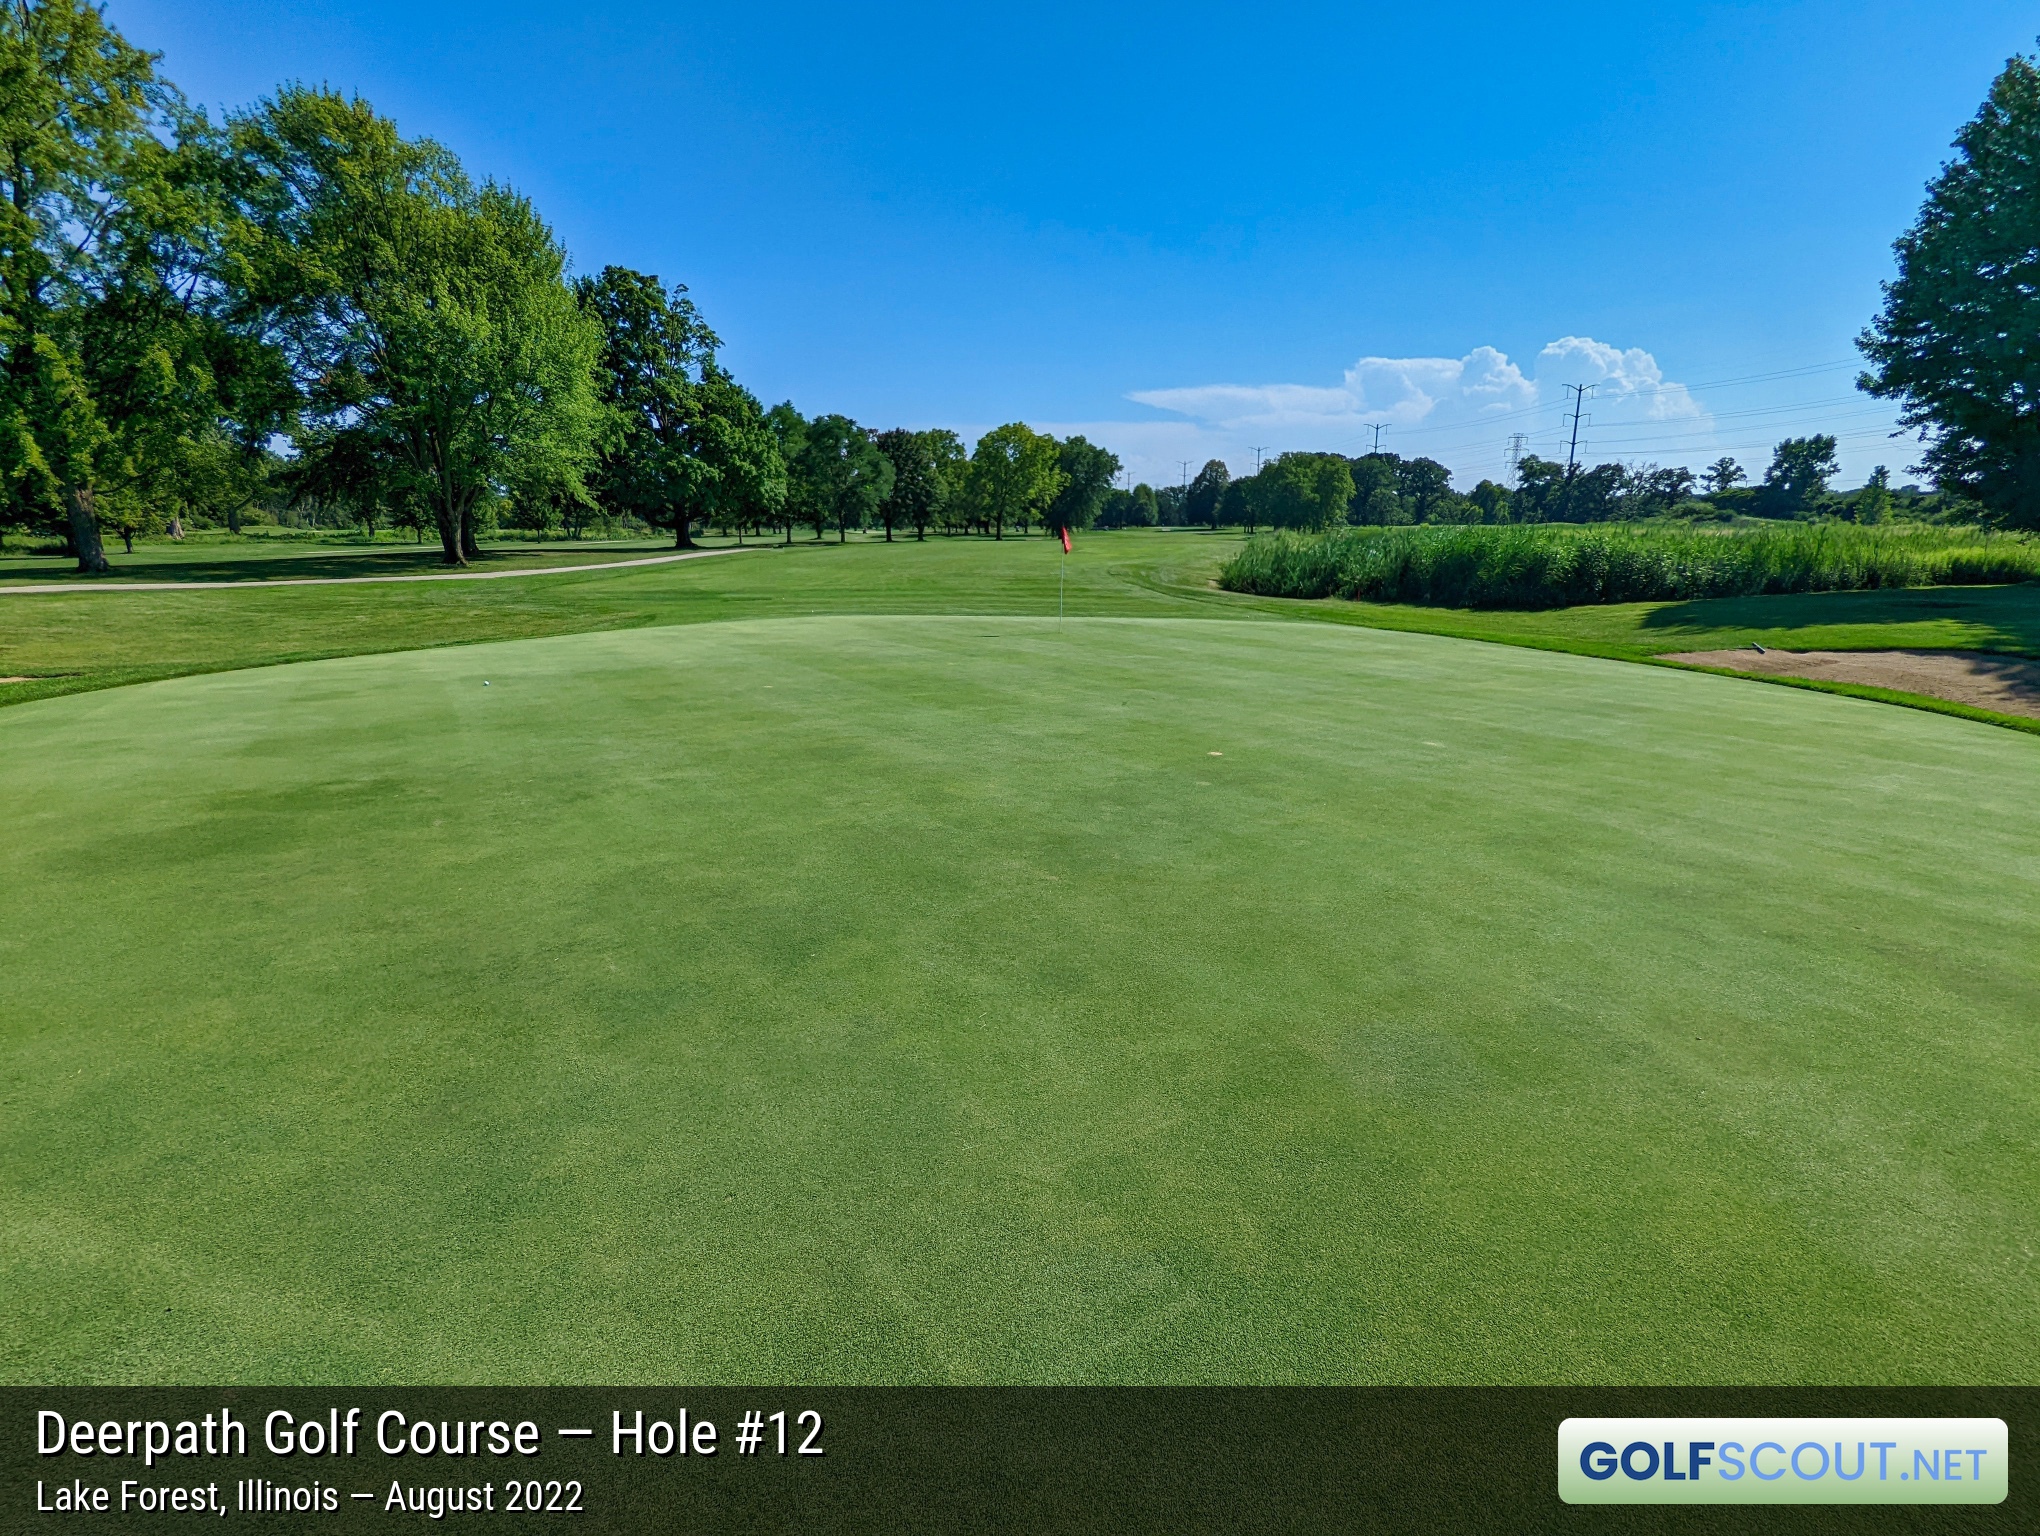 Photo of hole #12 at Deerpath Golf Course in Lake Forest, Illinois. 